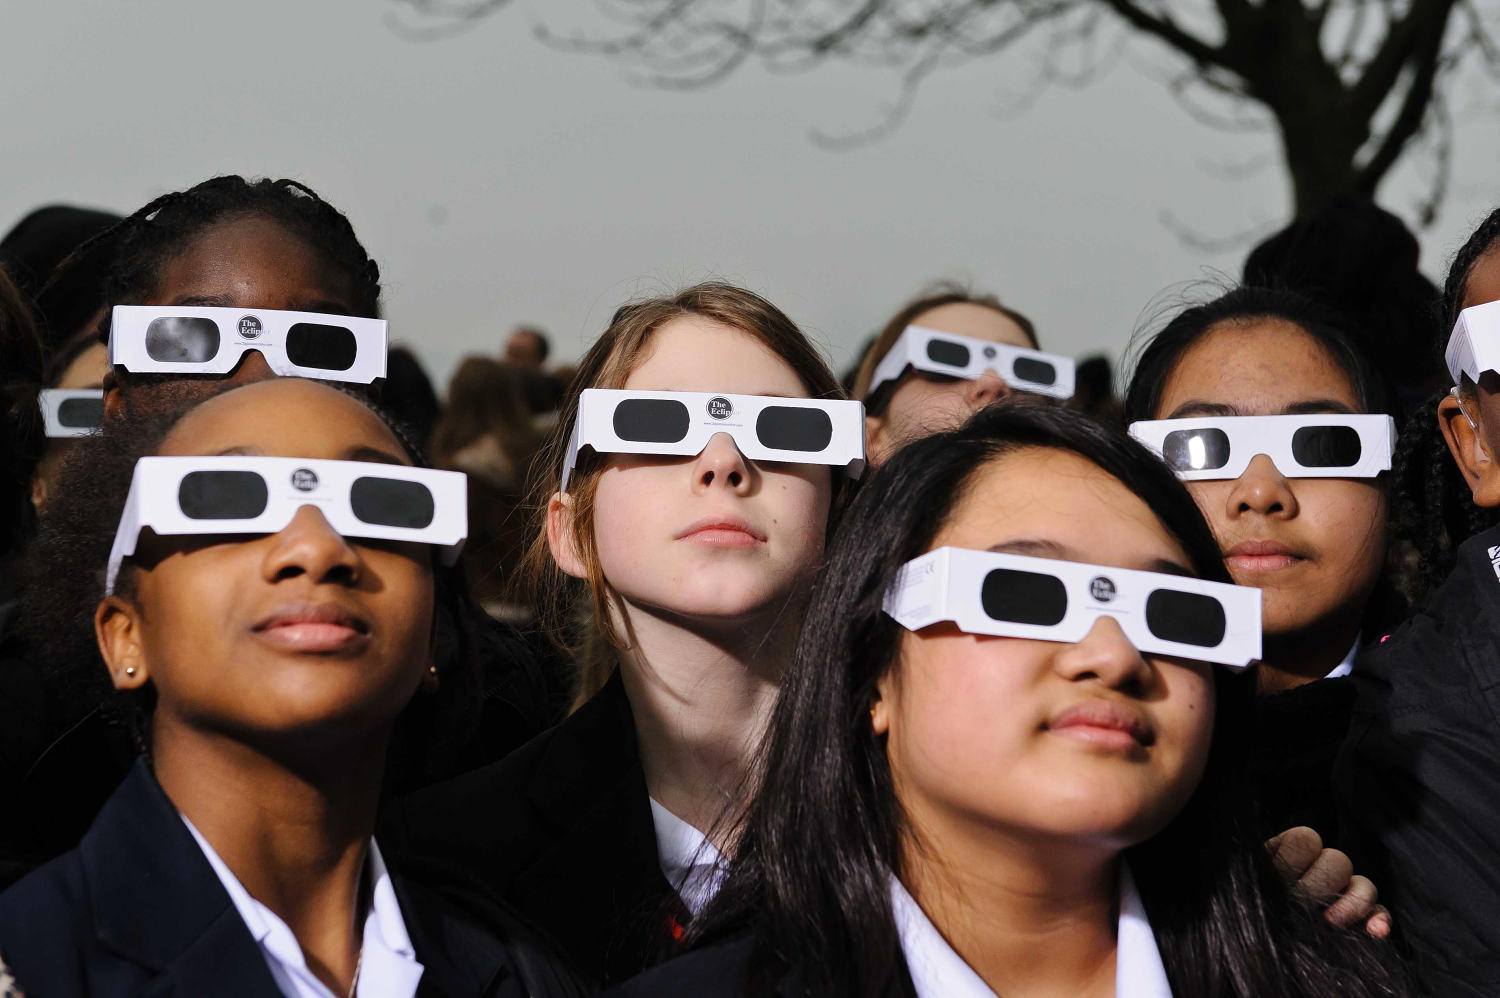 Why are some schools closing for the solar eclipse in April? What